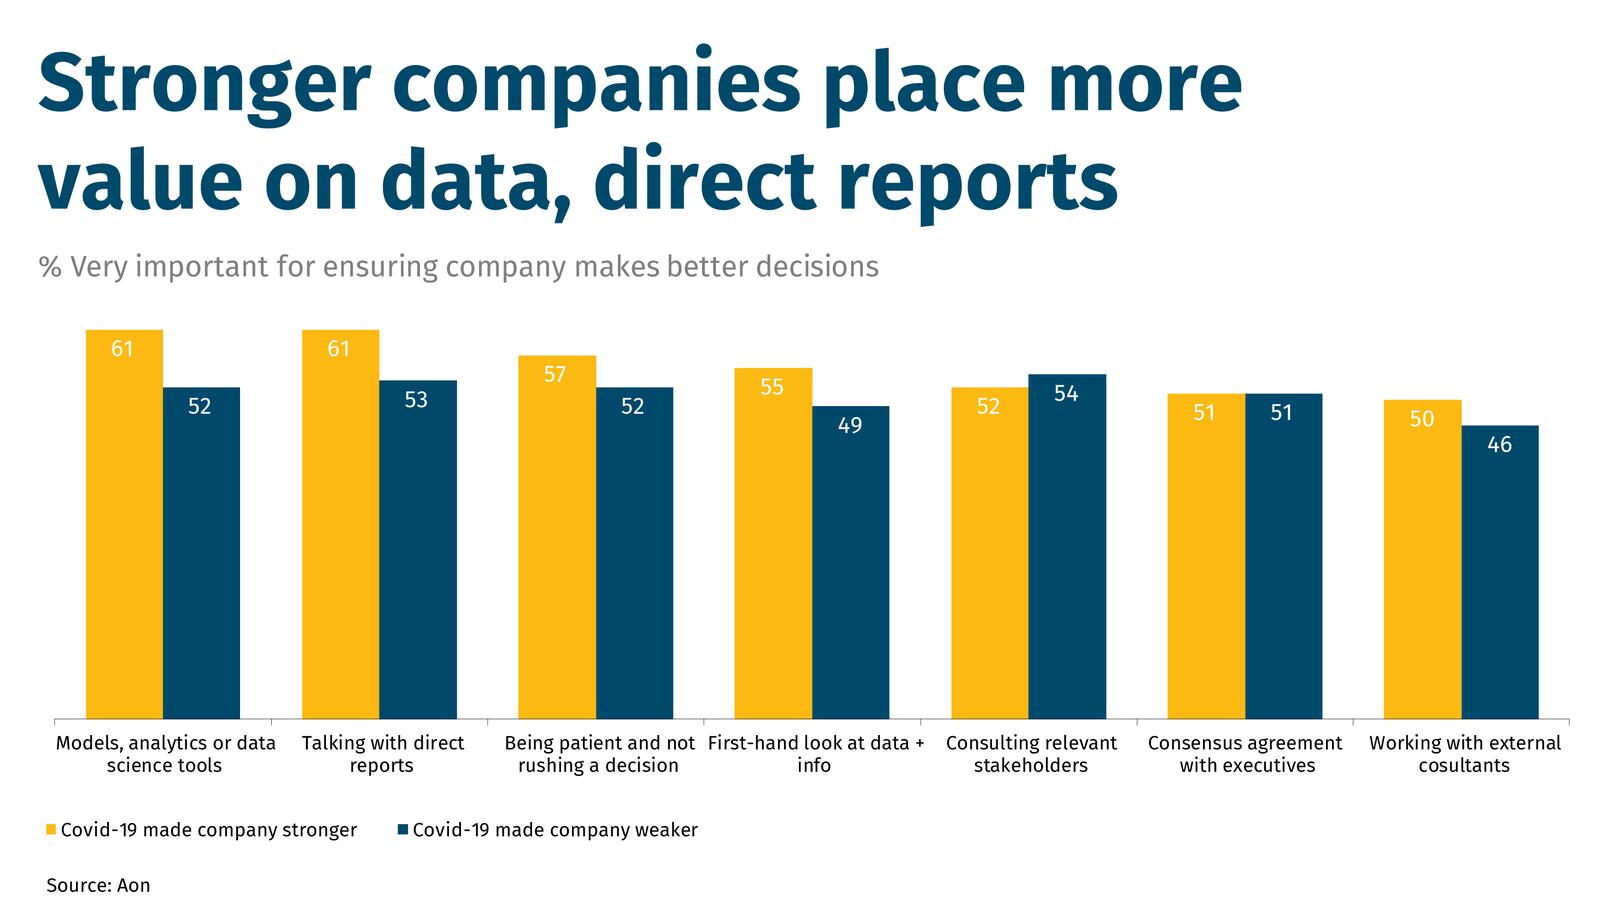 Stronger companies place more value on data, direct reports